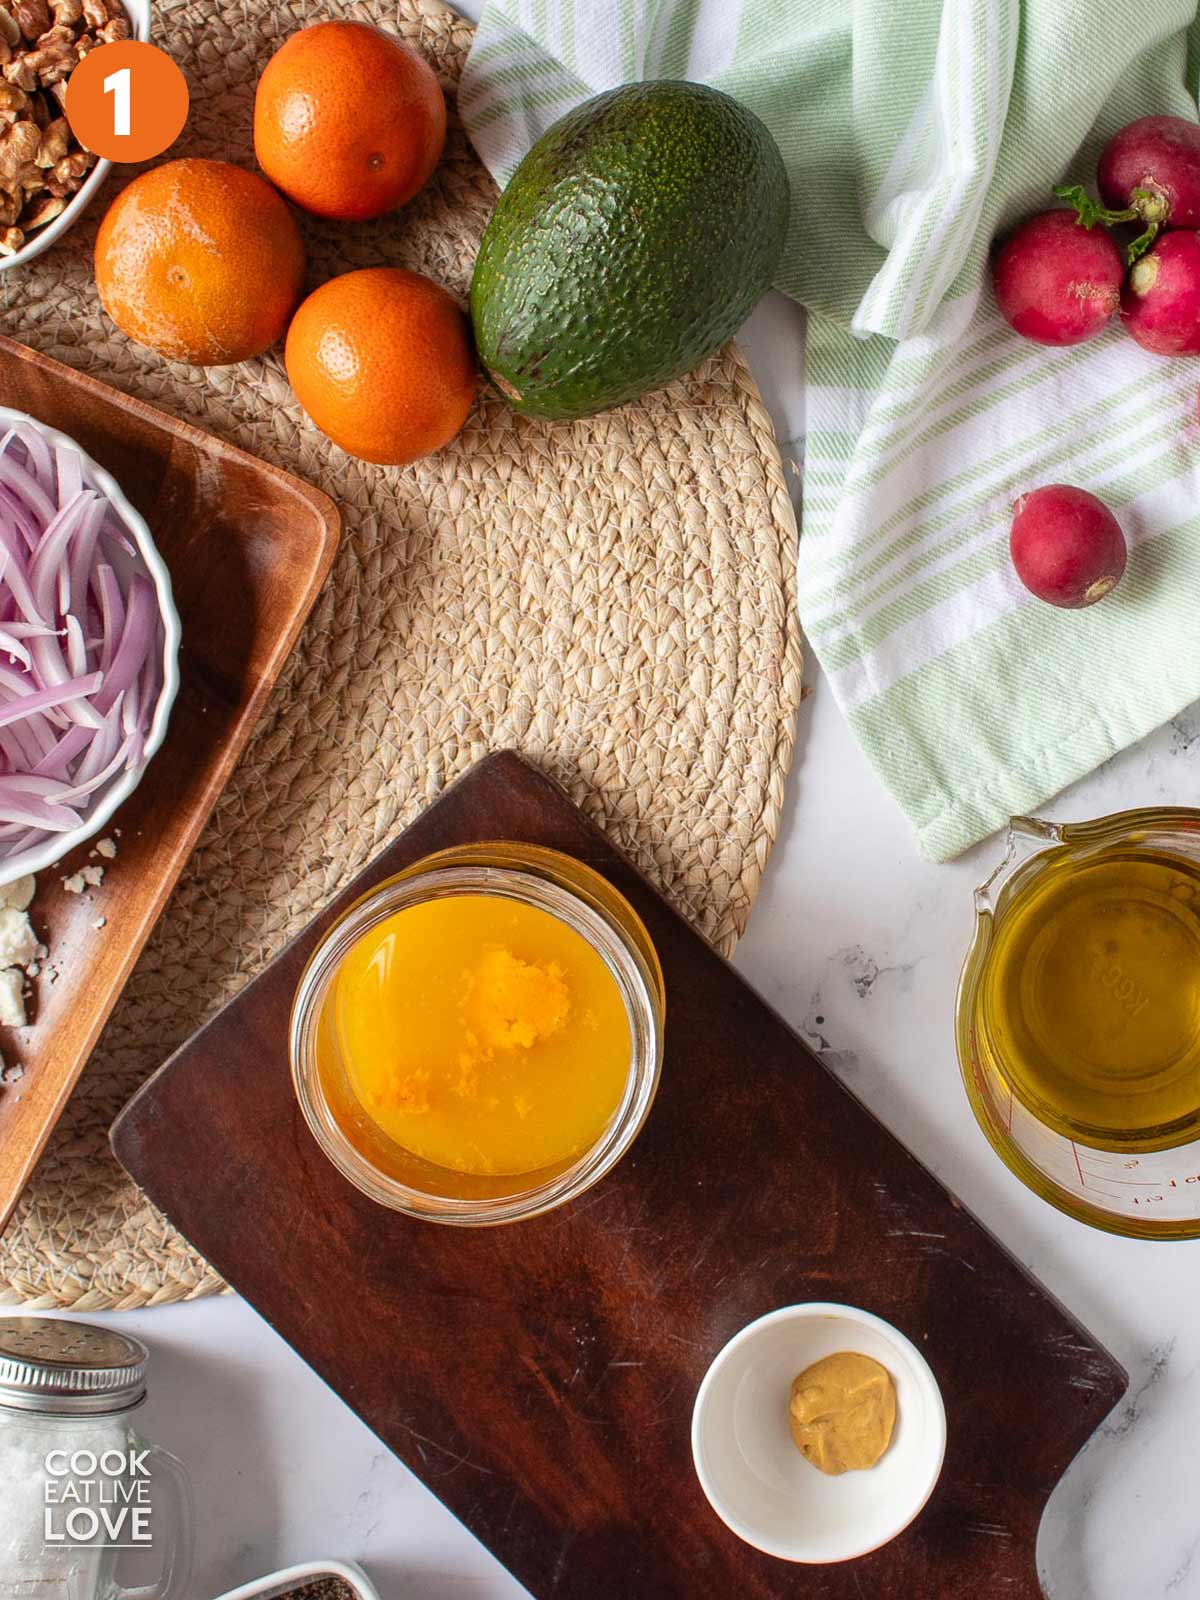 Adding the ingredients to a jar to make the citrus vinaigrette for a salad with pickled beets.